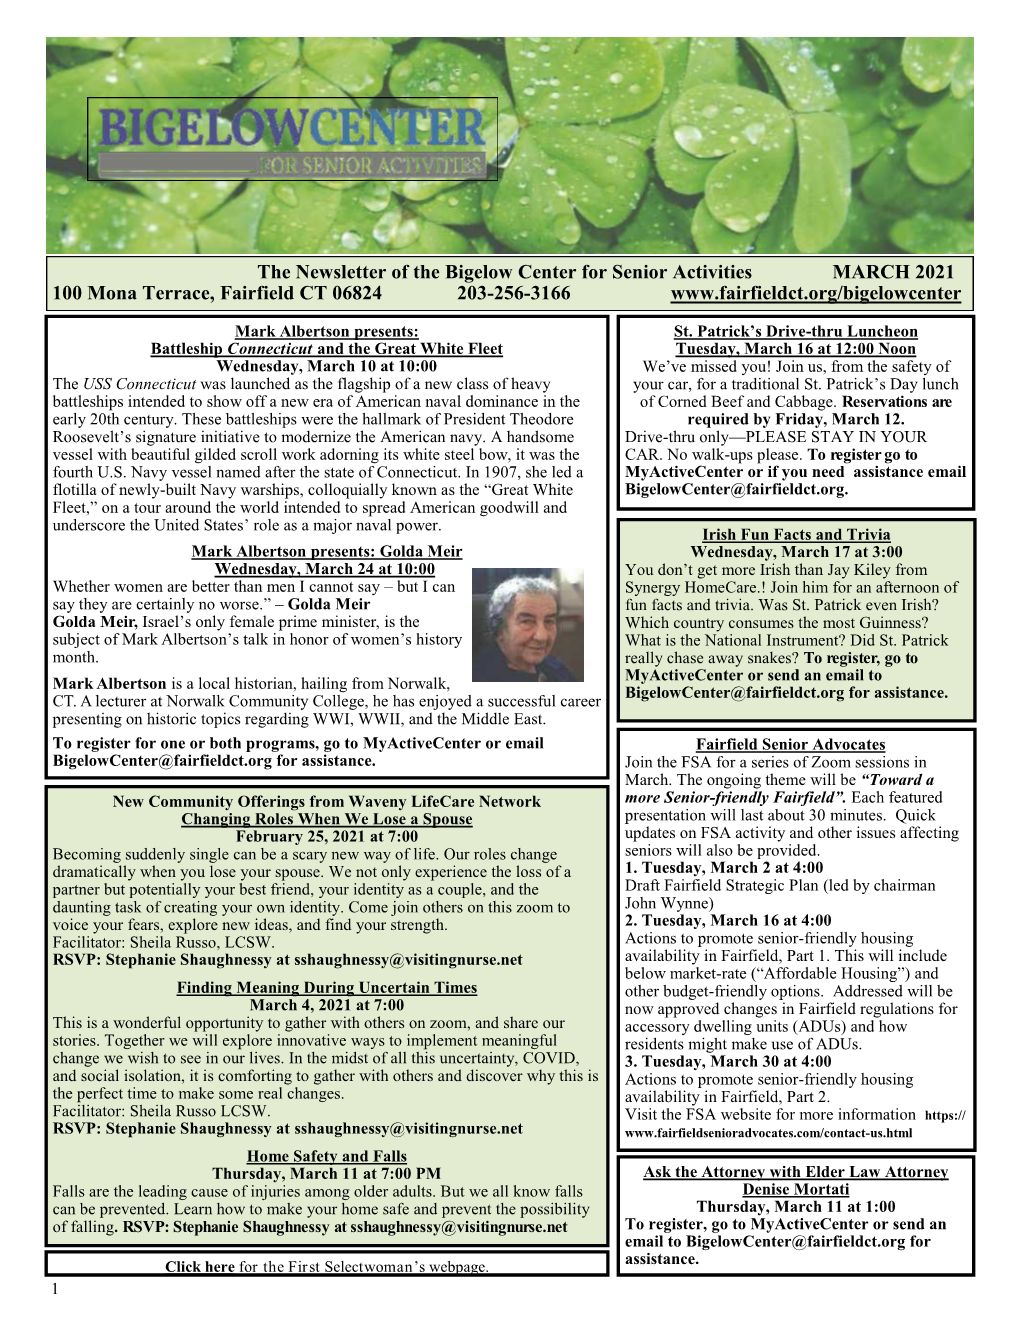 The Newsletter of the Bigelow Center for Senior Activities MARCH 2021 100 Mona Terrace, Fairfield CT 06824 203-256-3166